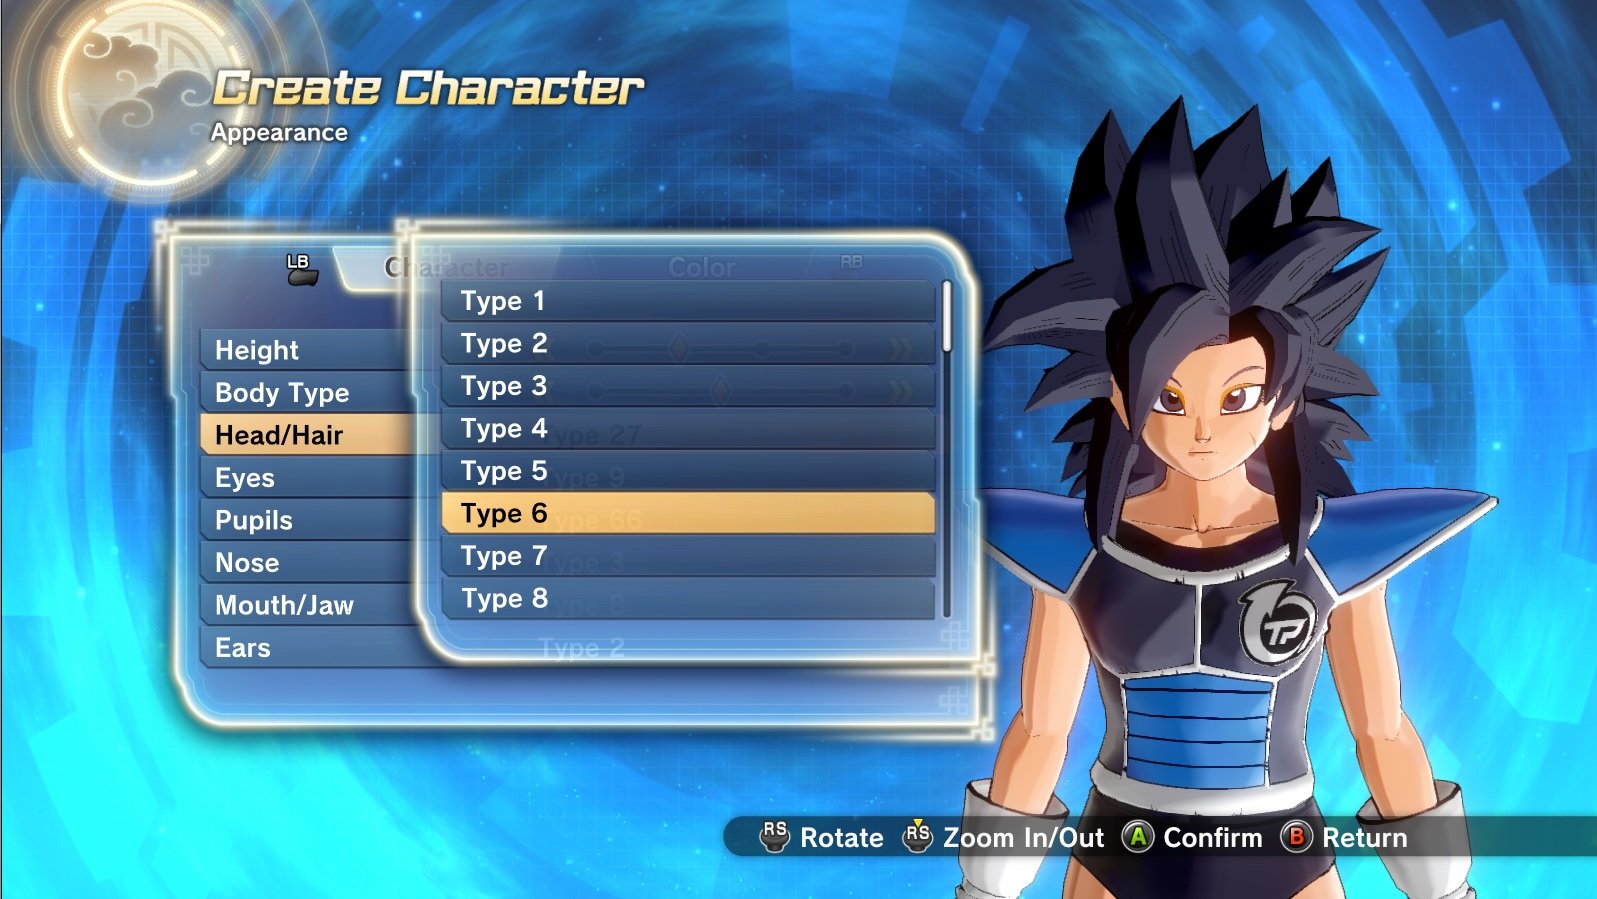 Tryzick on Twitter For those who use twotone Hairstyles or Bandanas  attached to their hairstyles this tutorial is for you for Lazybones  Transformation mod  httpstcoOAh8UYddoQ Xenoverse2  httpstcoqqCpb5sI0Z  Twitter